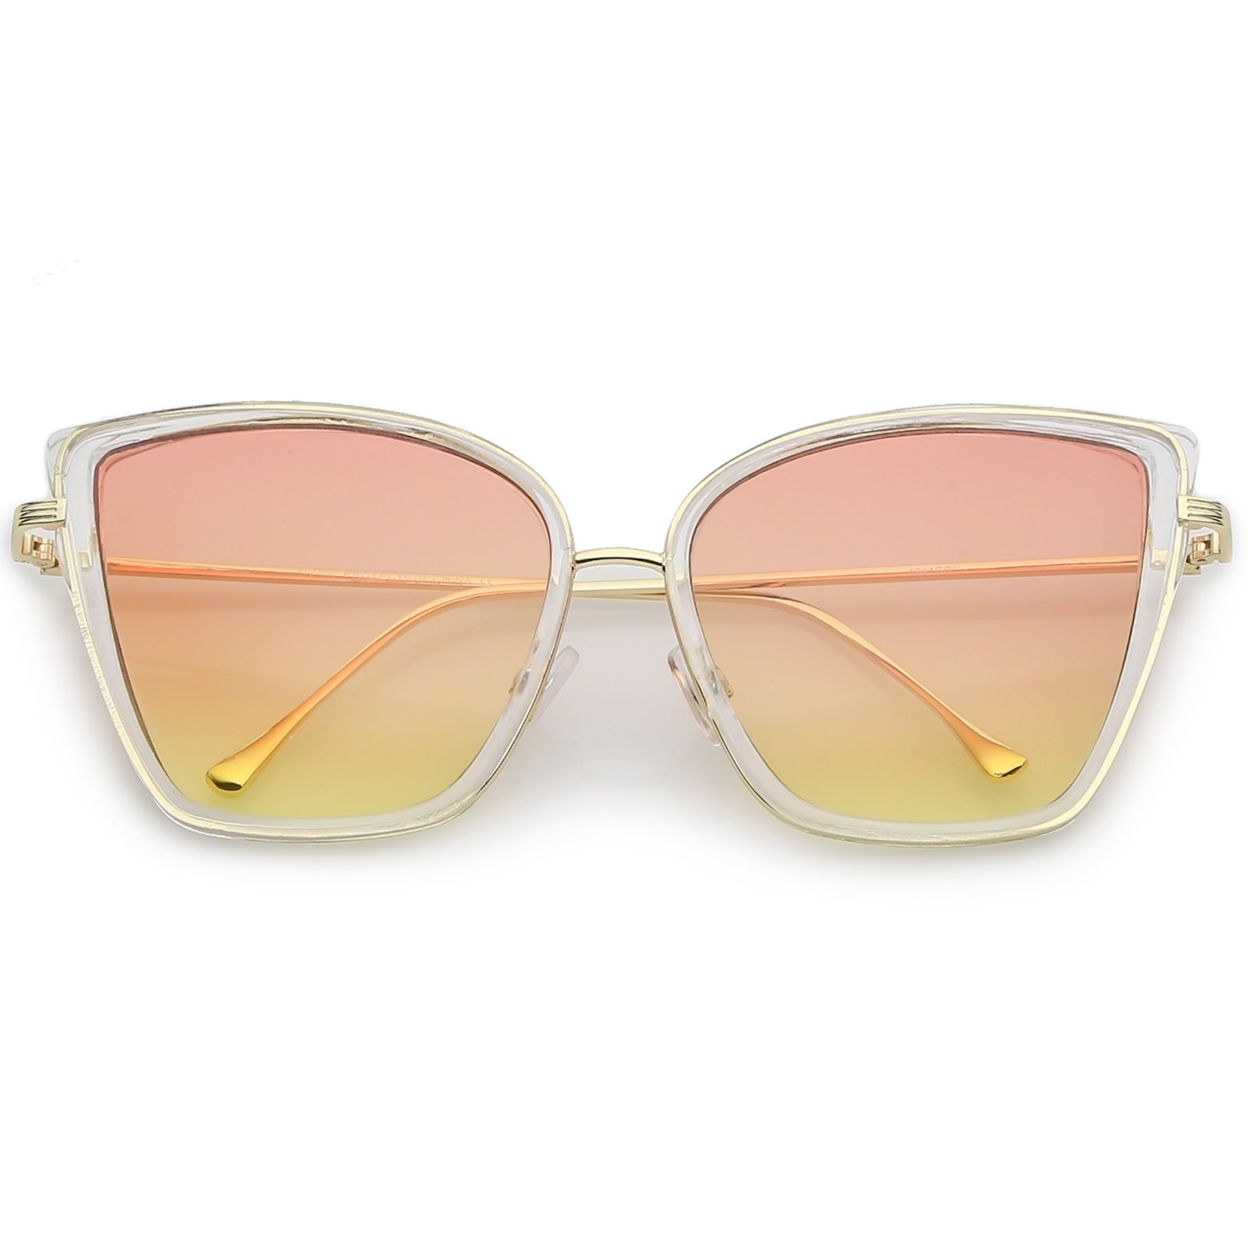 Women's Oversize Cat Eye Sunglasses With Slim Arms Colored Gradient Lens 56mm - Clear Gld / Orange Yellow